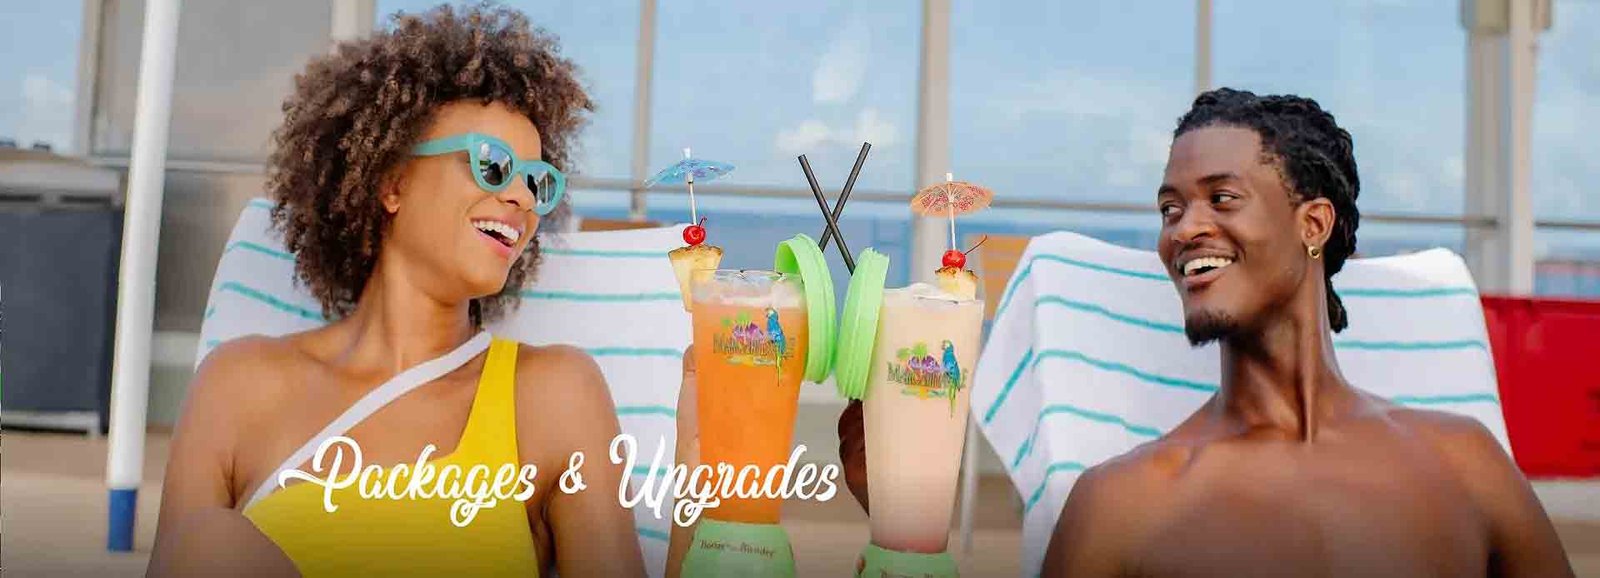 Margaritaville PACKAGES UPGRADES and Add Ons